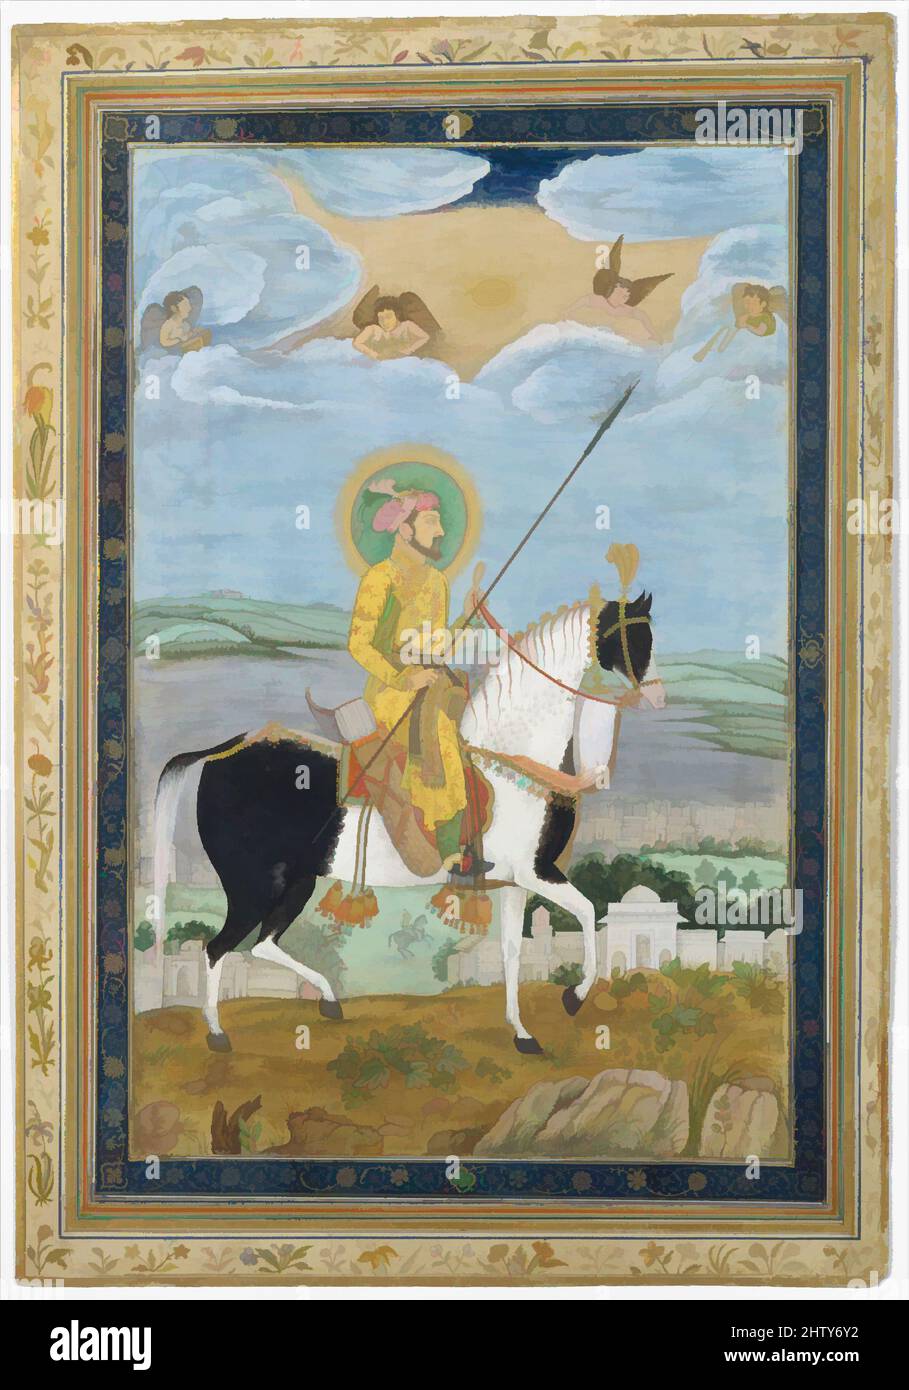 Art inspired by Portrait of Shah Jahan on Horseback, 17th century, Attributed to India, Ink, opaque watercolor, and gold on paper, Image 8 3/8 in x 12 3/8 in., Codices, Classic works modernized by Artotop with a splash of modernity. Shapes, color and value, eye-catching visual impact on art. Emotions through freedom of artworks in a contemporary way. A timeless message pursuing a wildly creative new direction. Artists turning to the digital medium and creating the Artotop NFT Stock Photo